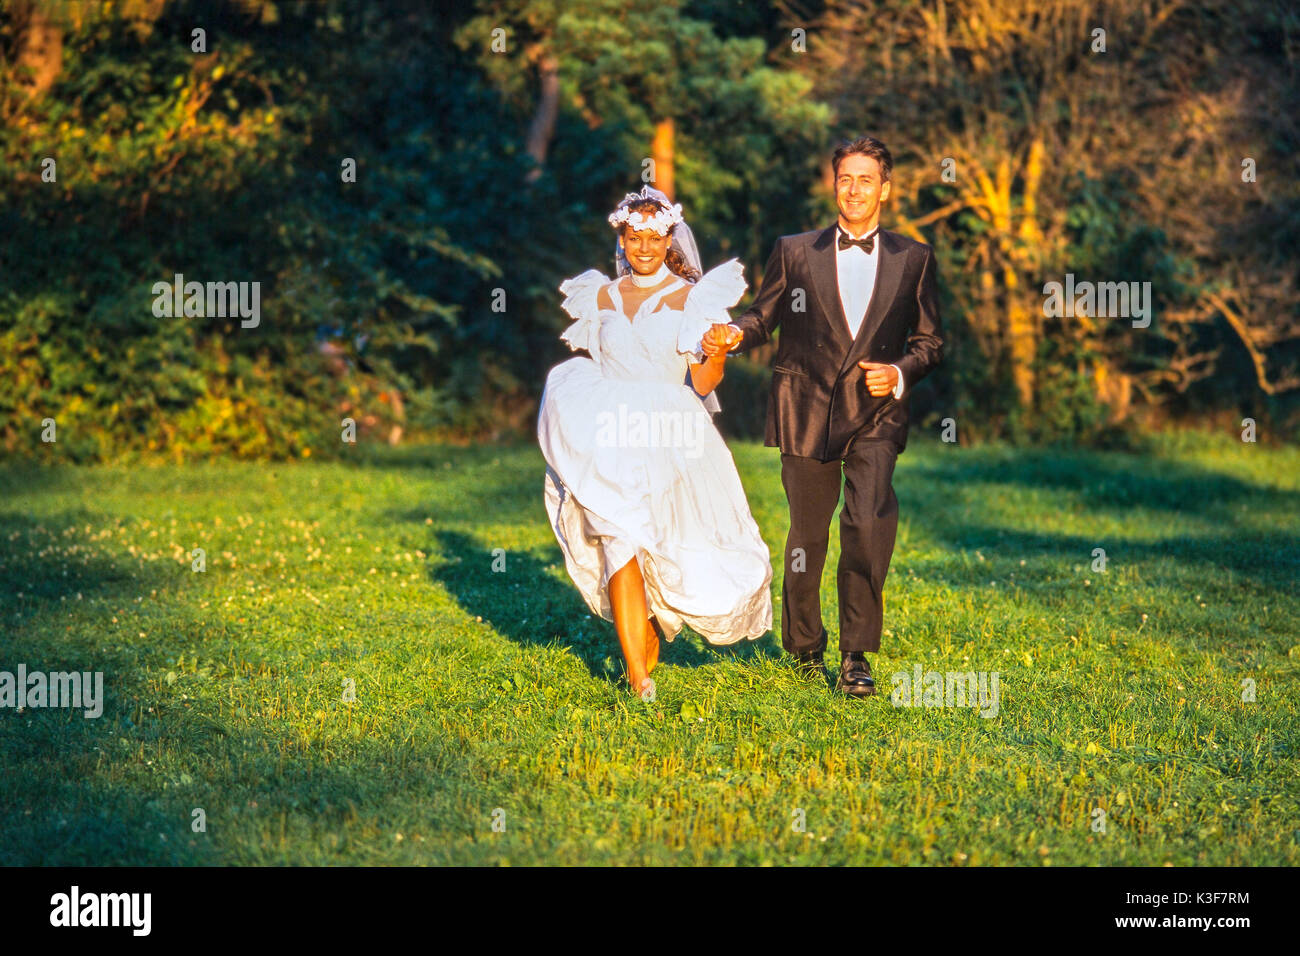 Bride and groom runs hand in hand over a meadow Stock Photo